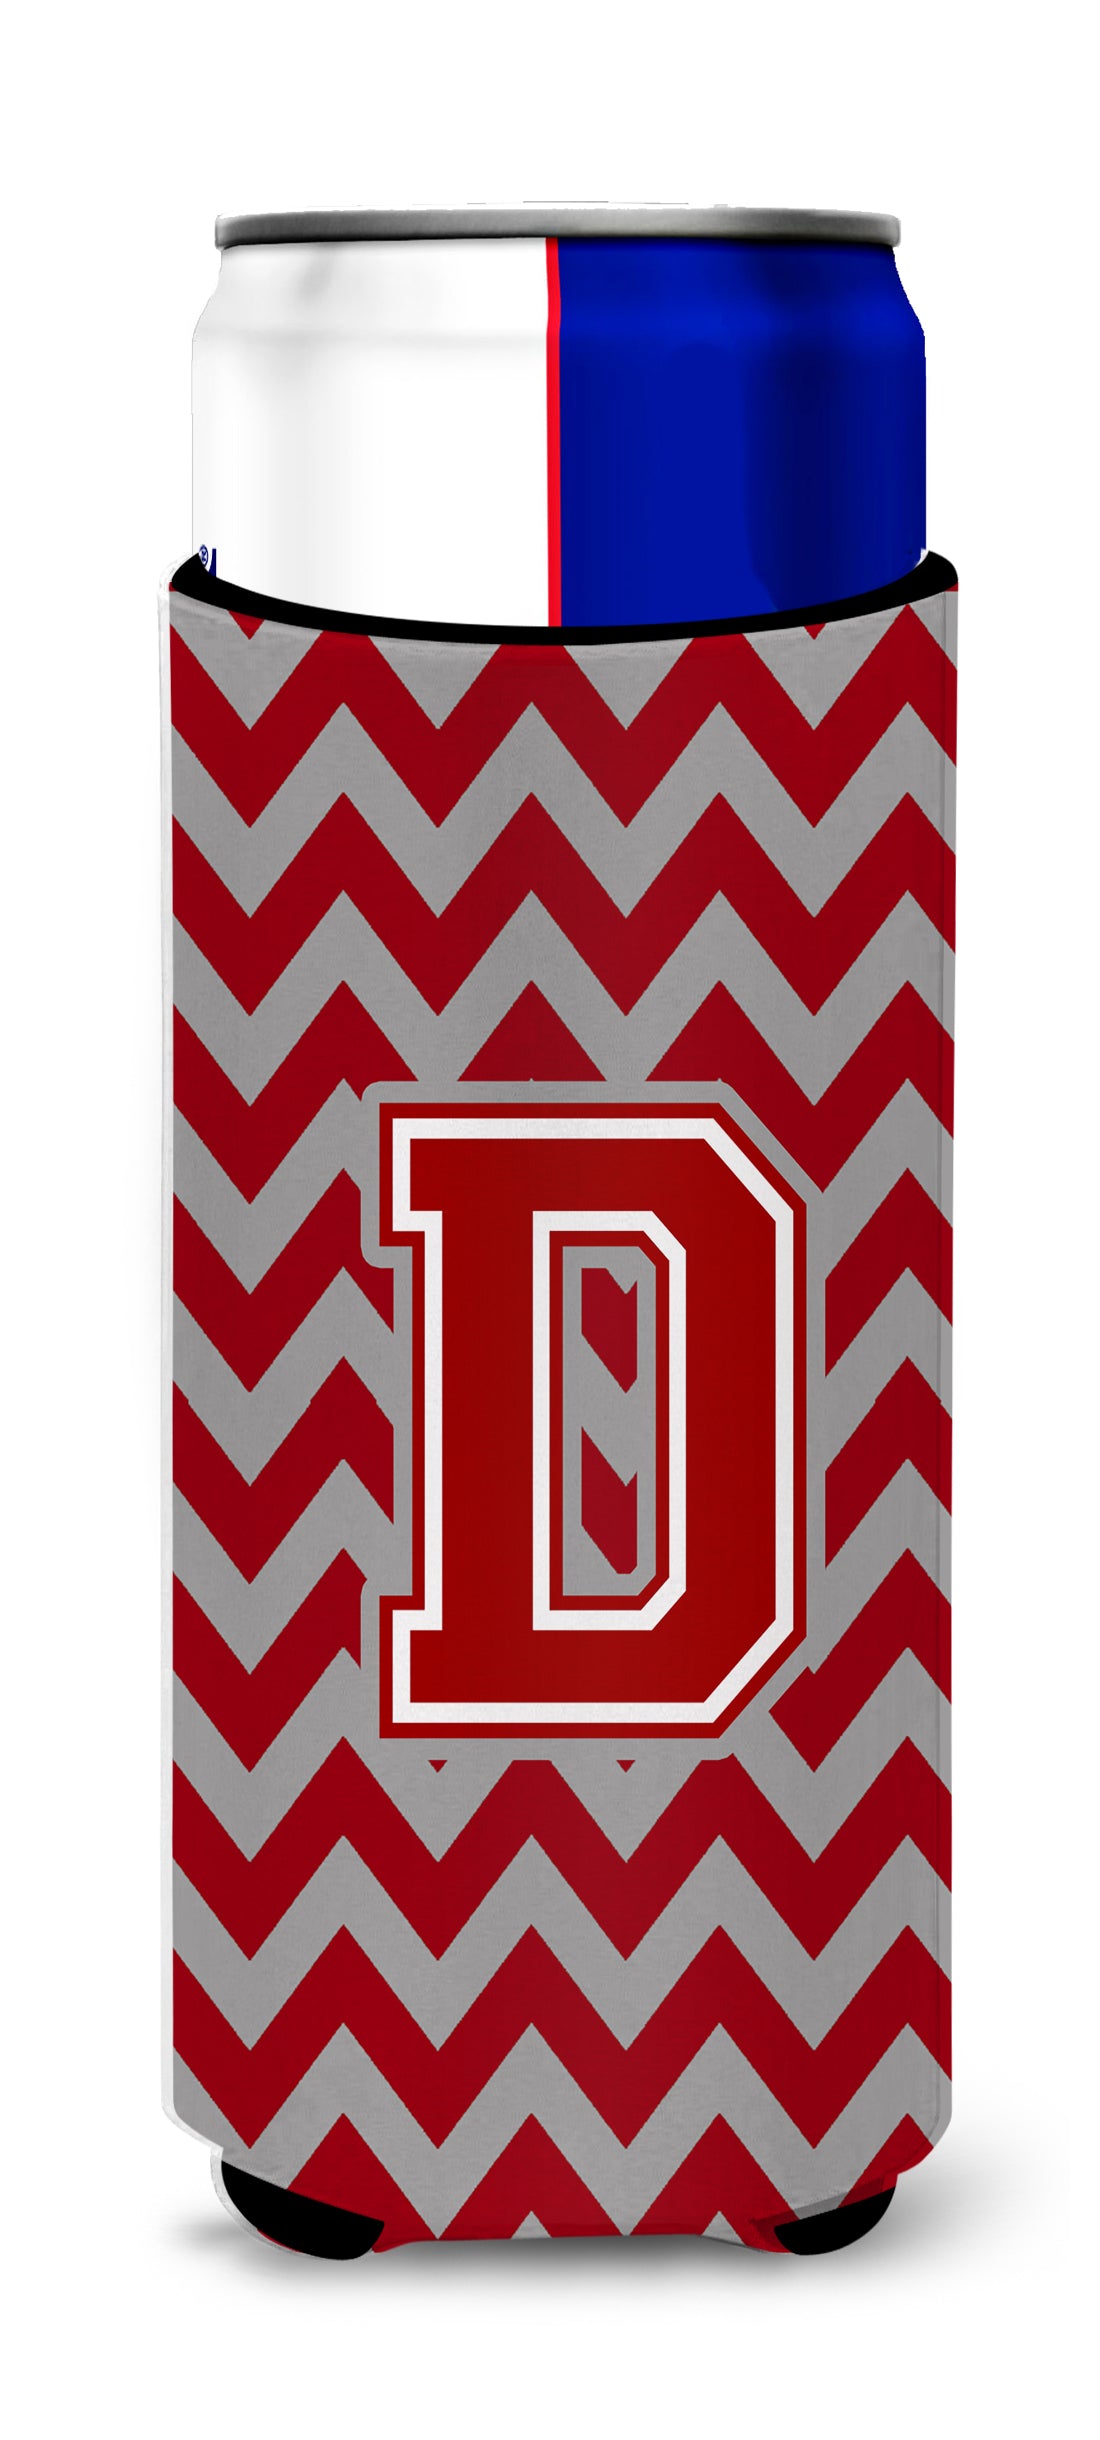 Letter D Chevron Maroon and White Ultra Beverage Insulators for slim cans CJ1049-DMUK